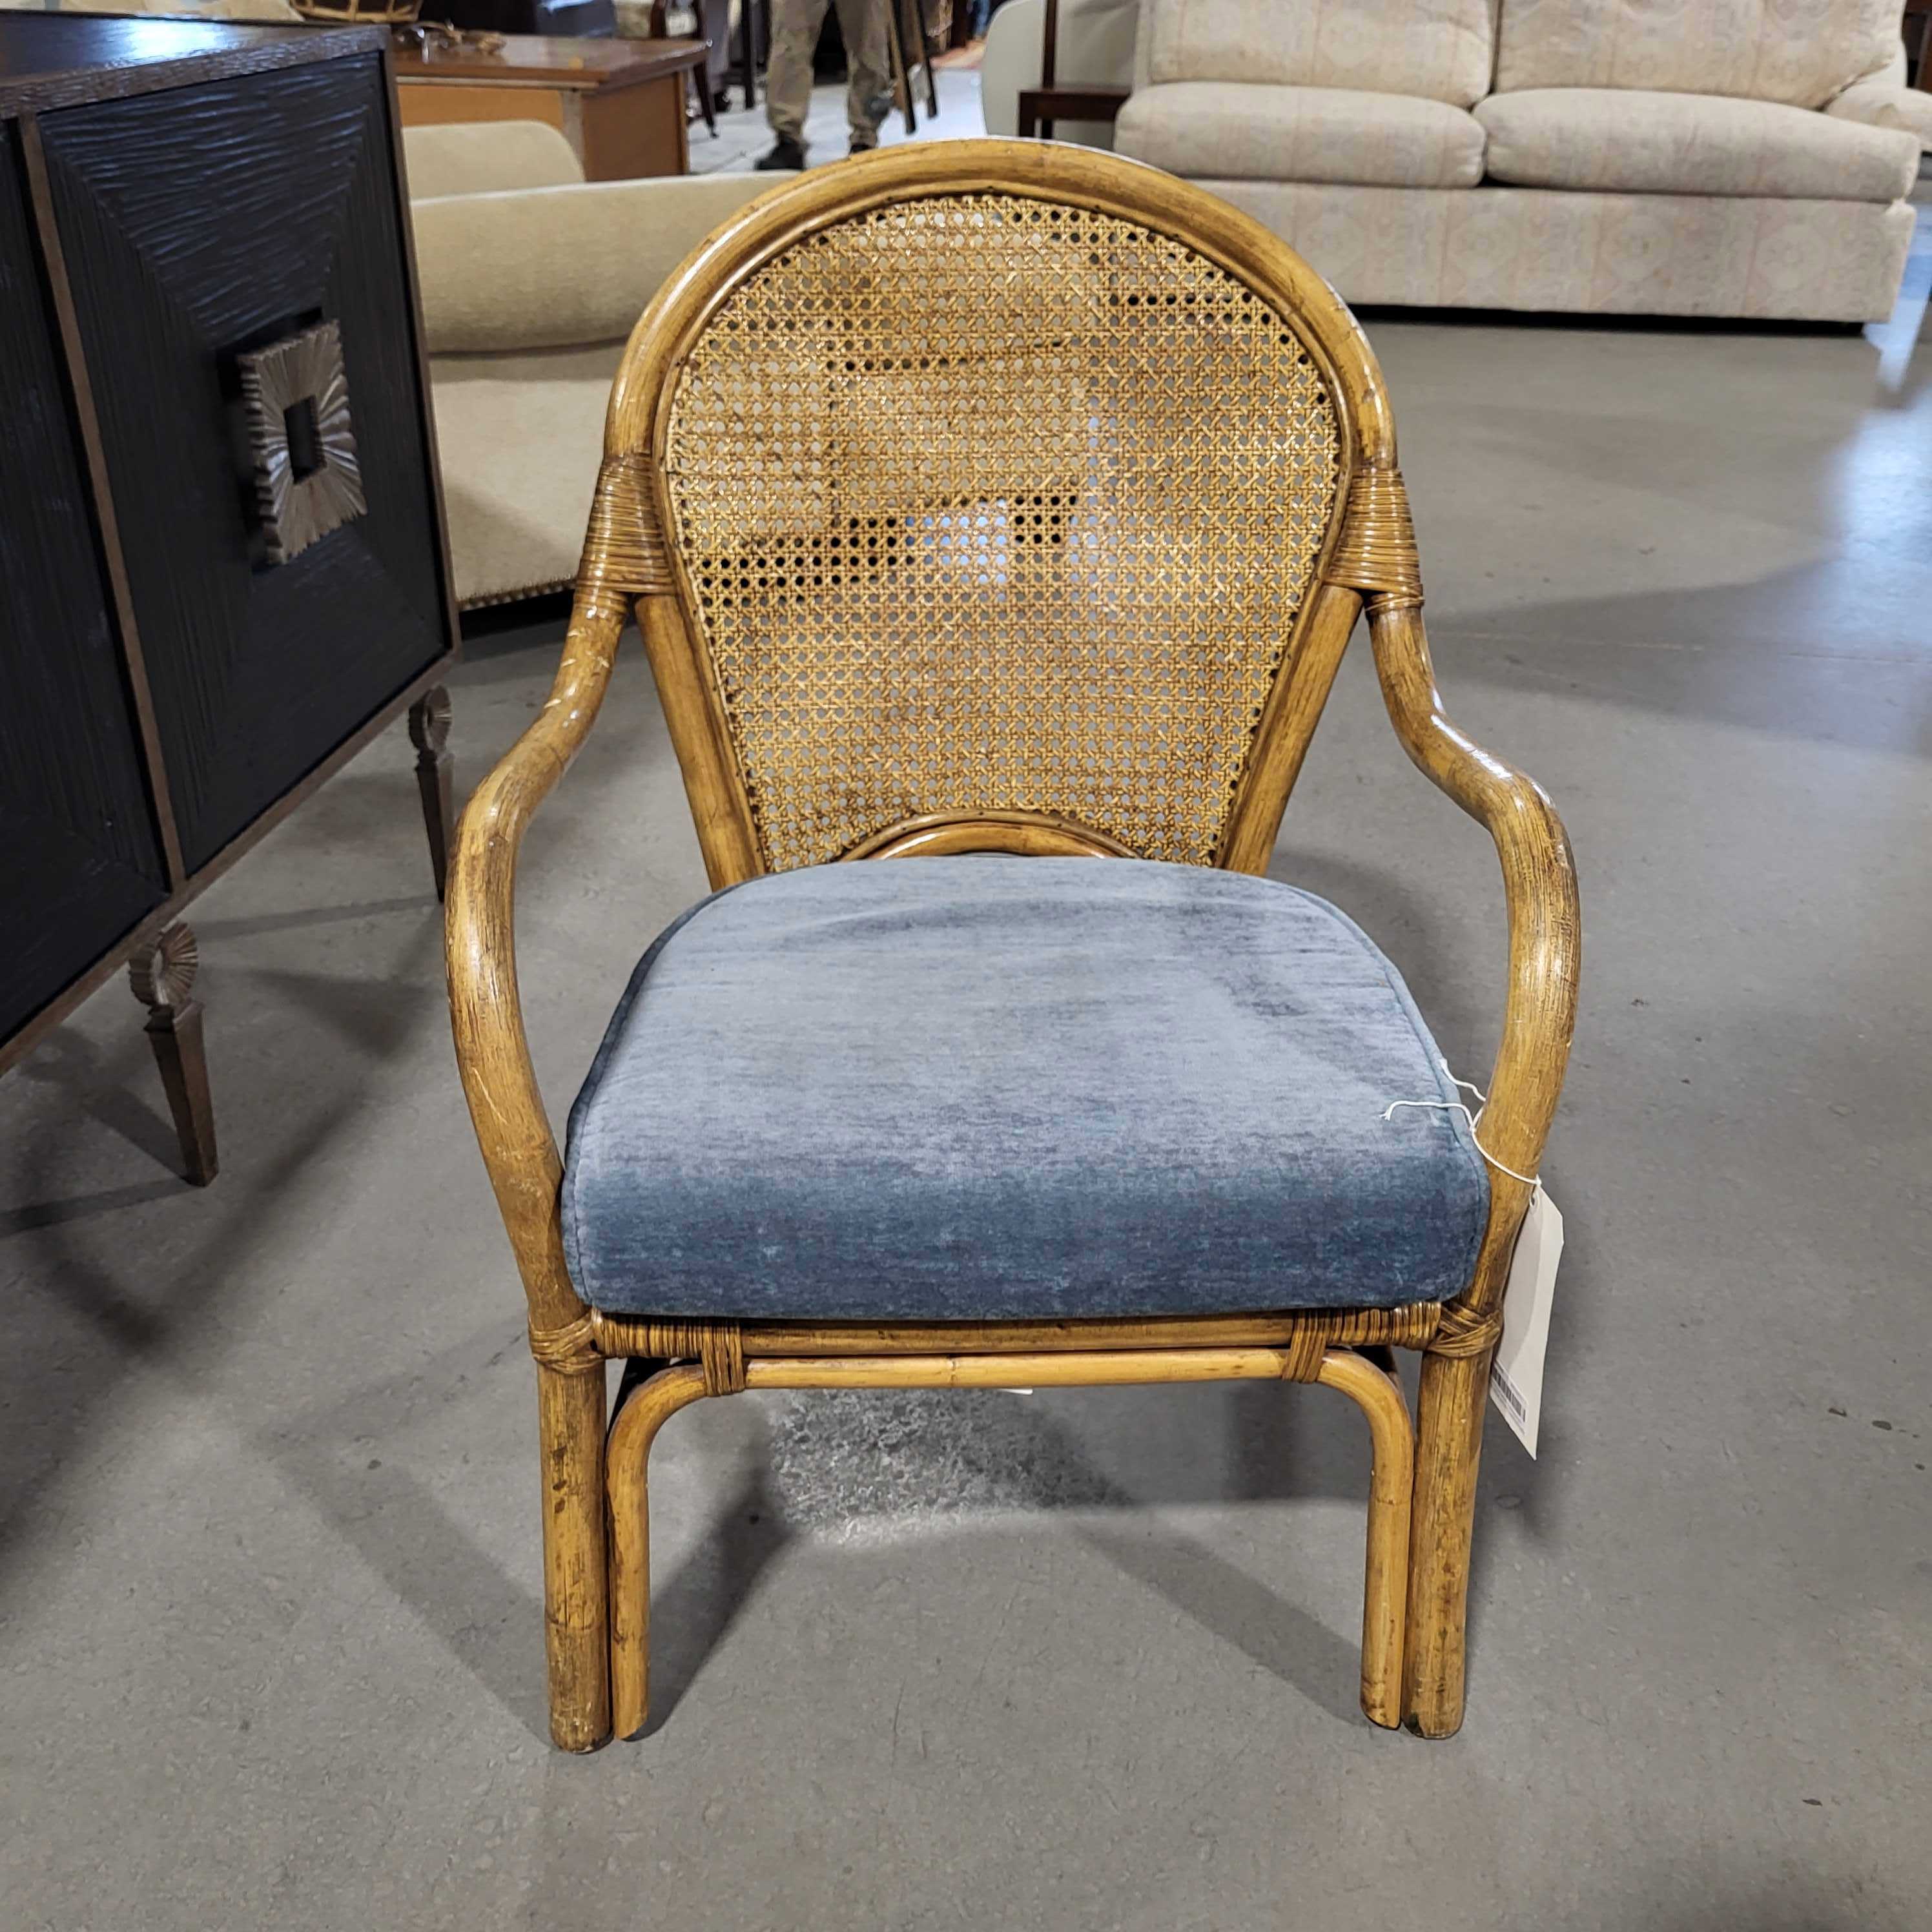 Natural Finish Cane and Wicker Blue Upholstered Cushion Arm Chair